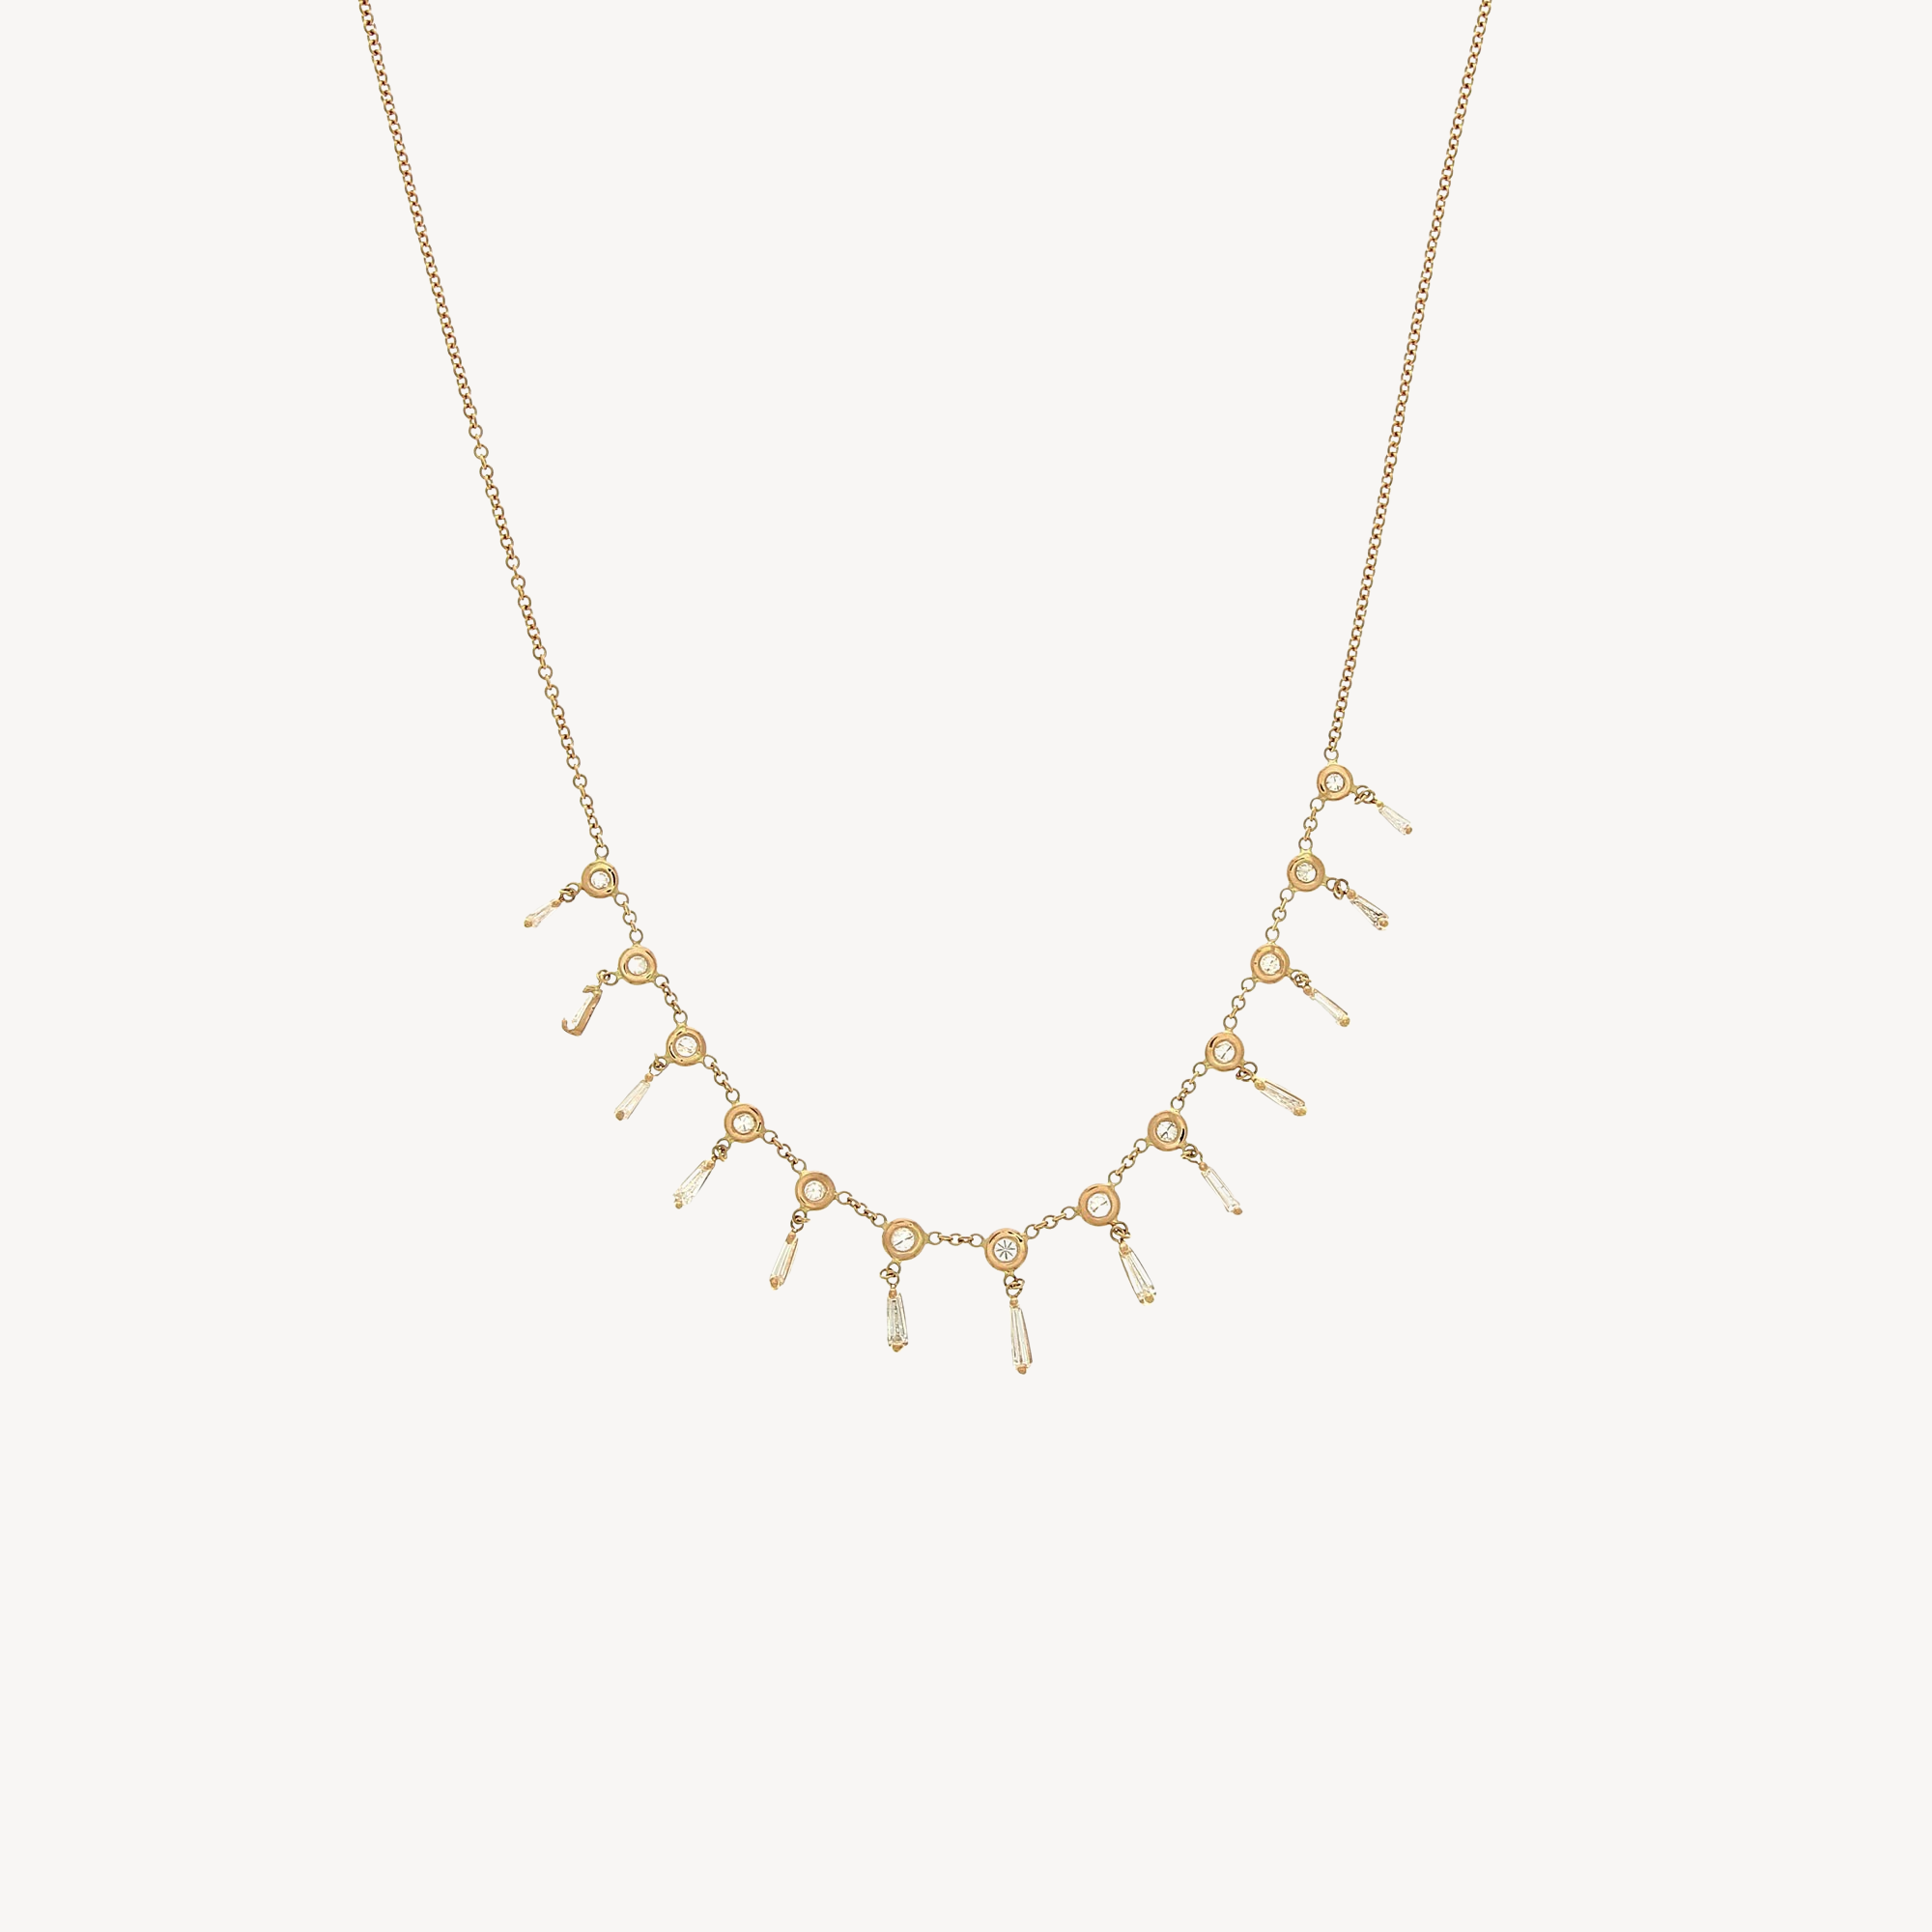 Graduated Round and Baguette Diamond Necklace